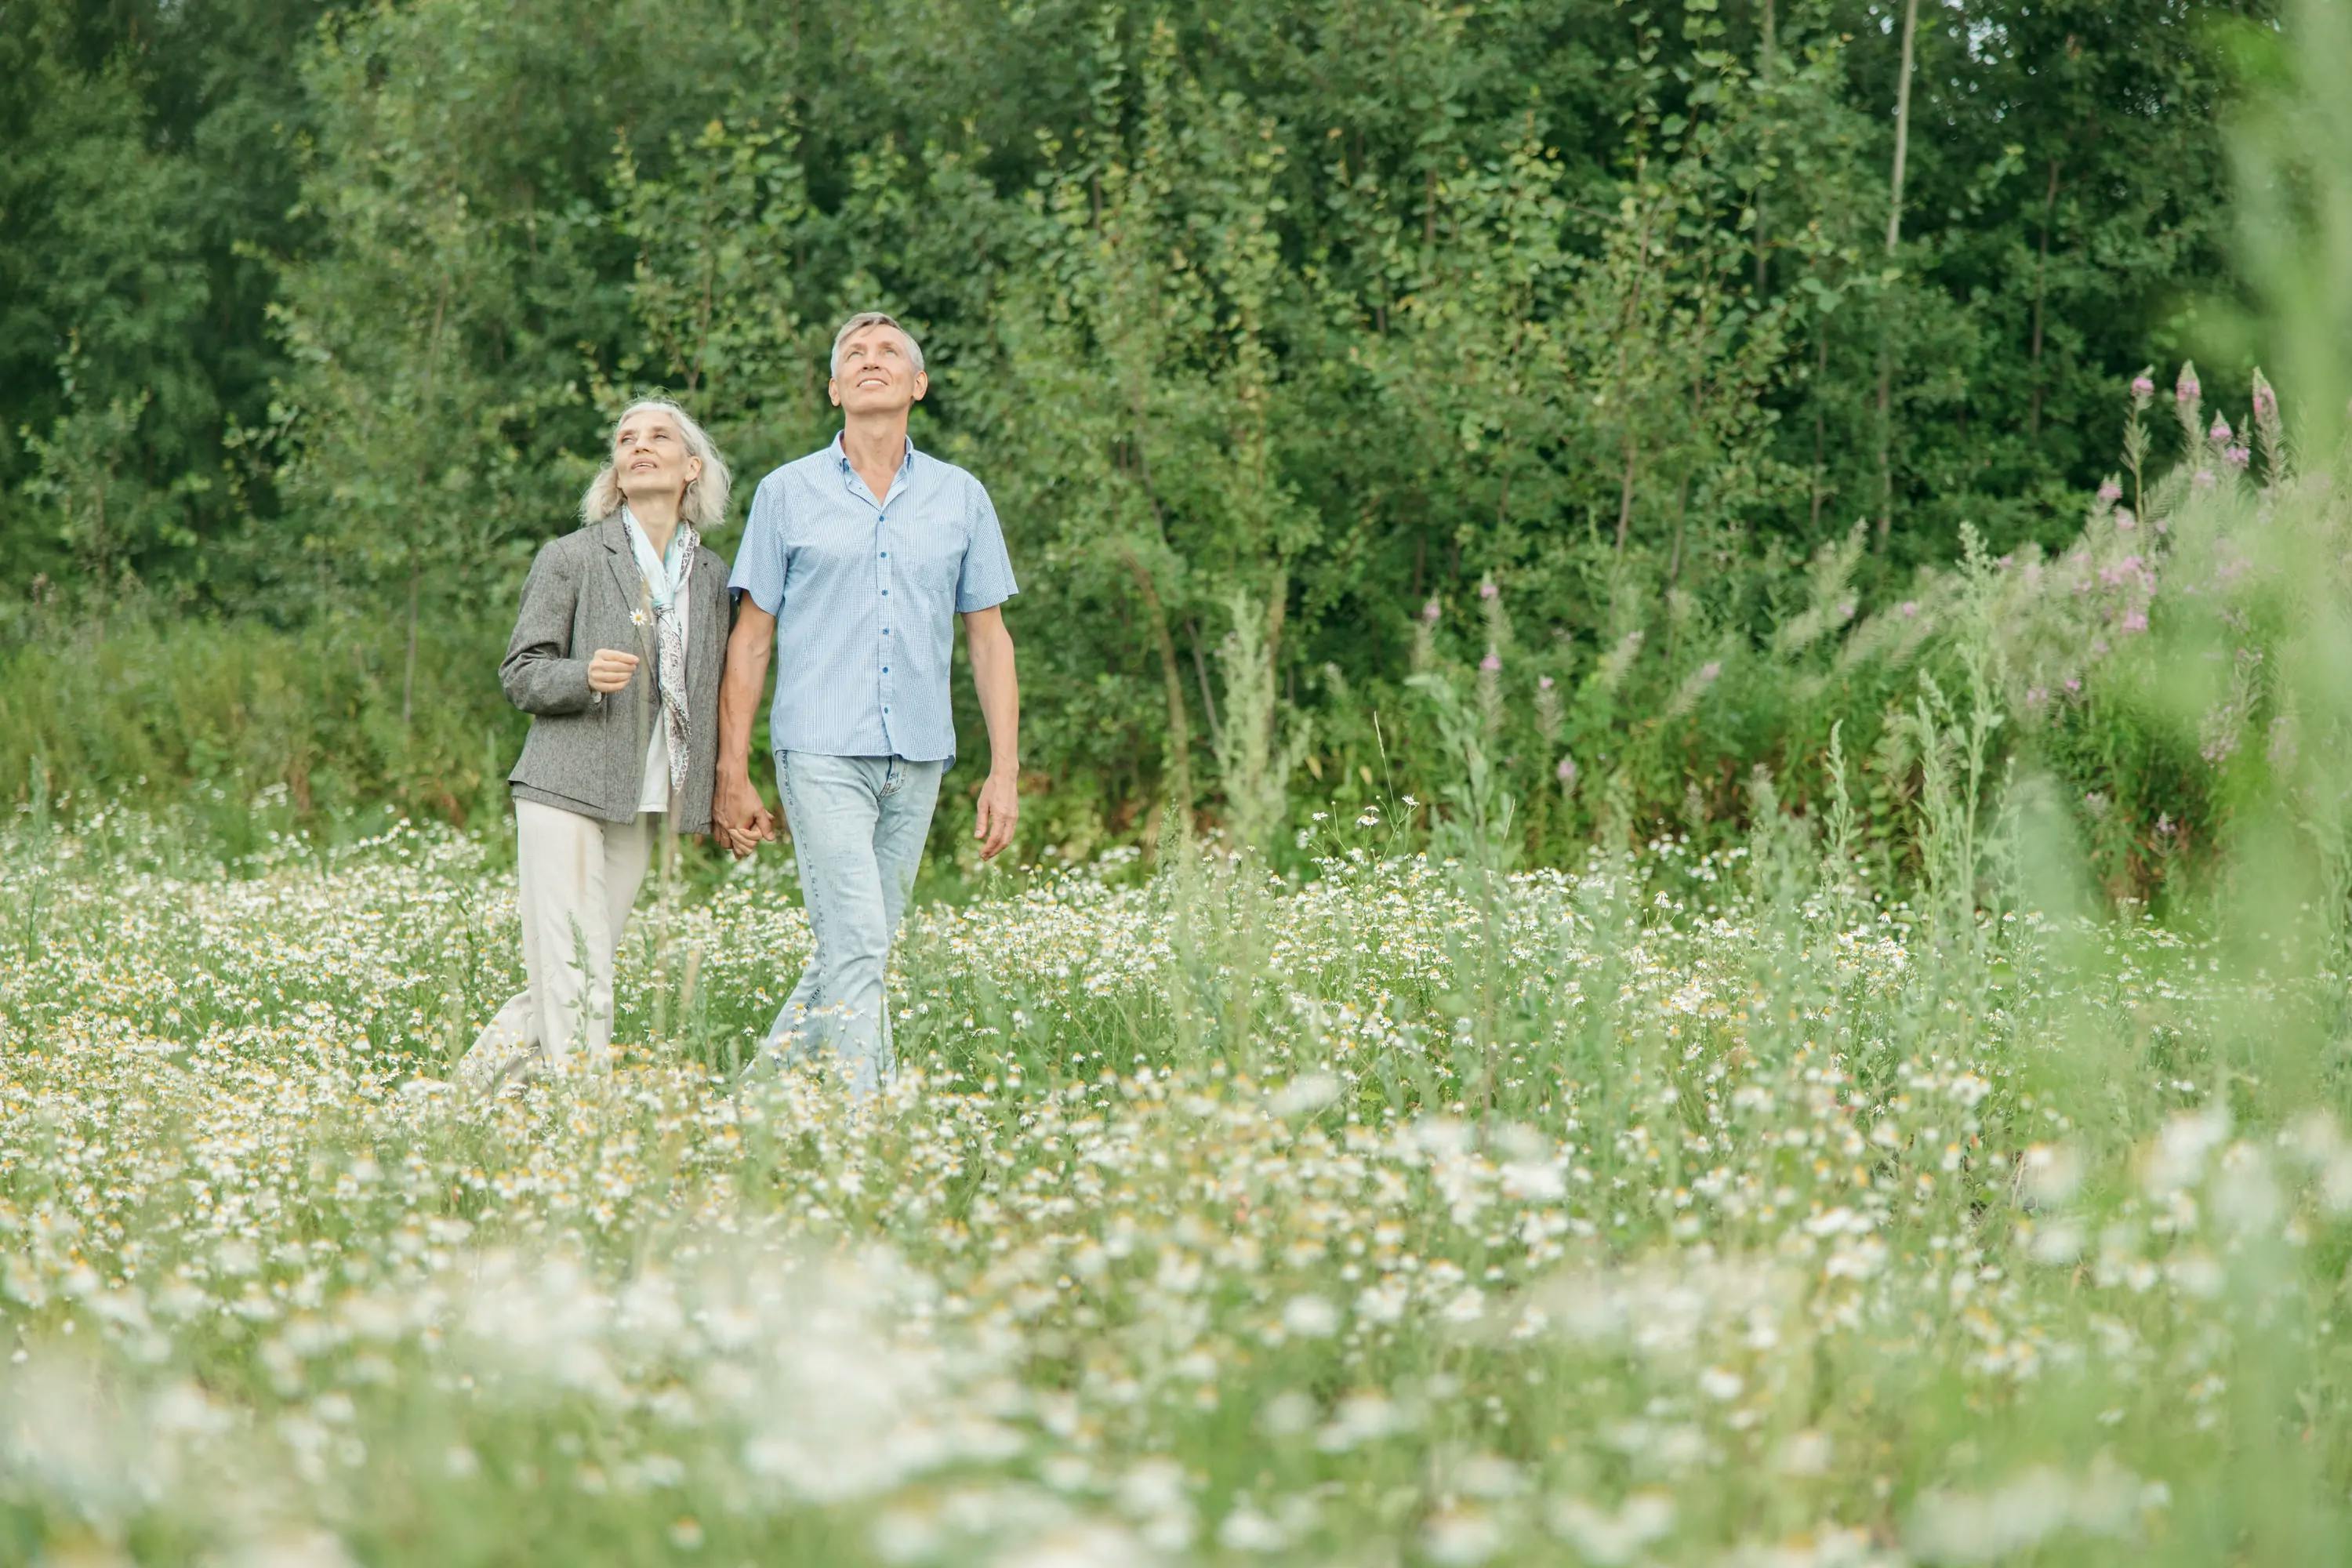 Older caucasian husband and wife, holding hands while walking through a field of white flowers near a forest.